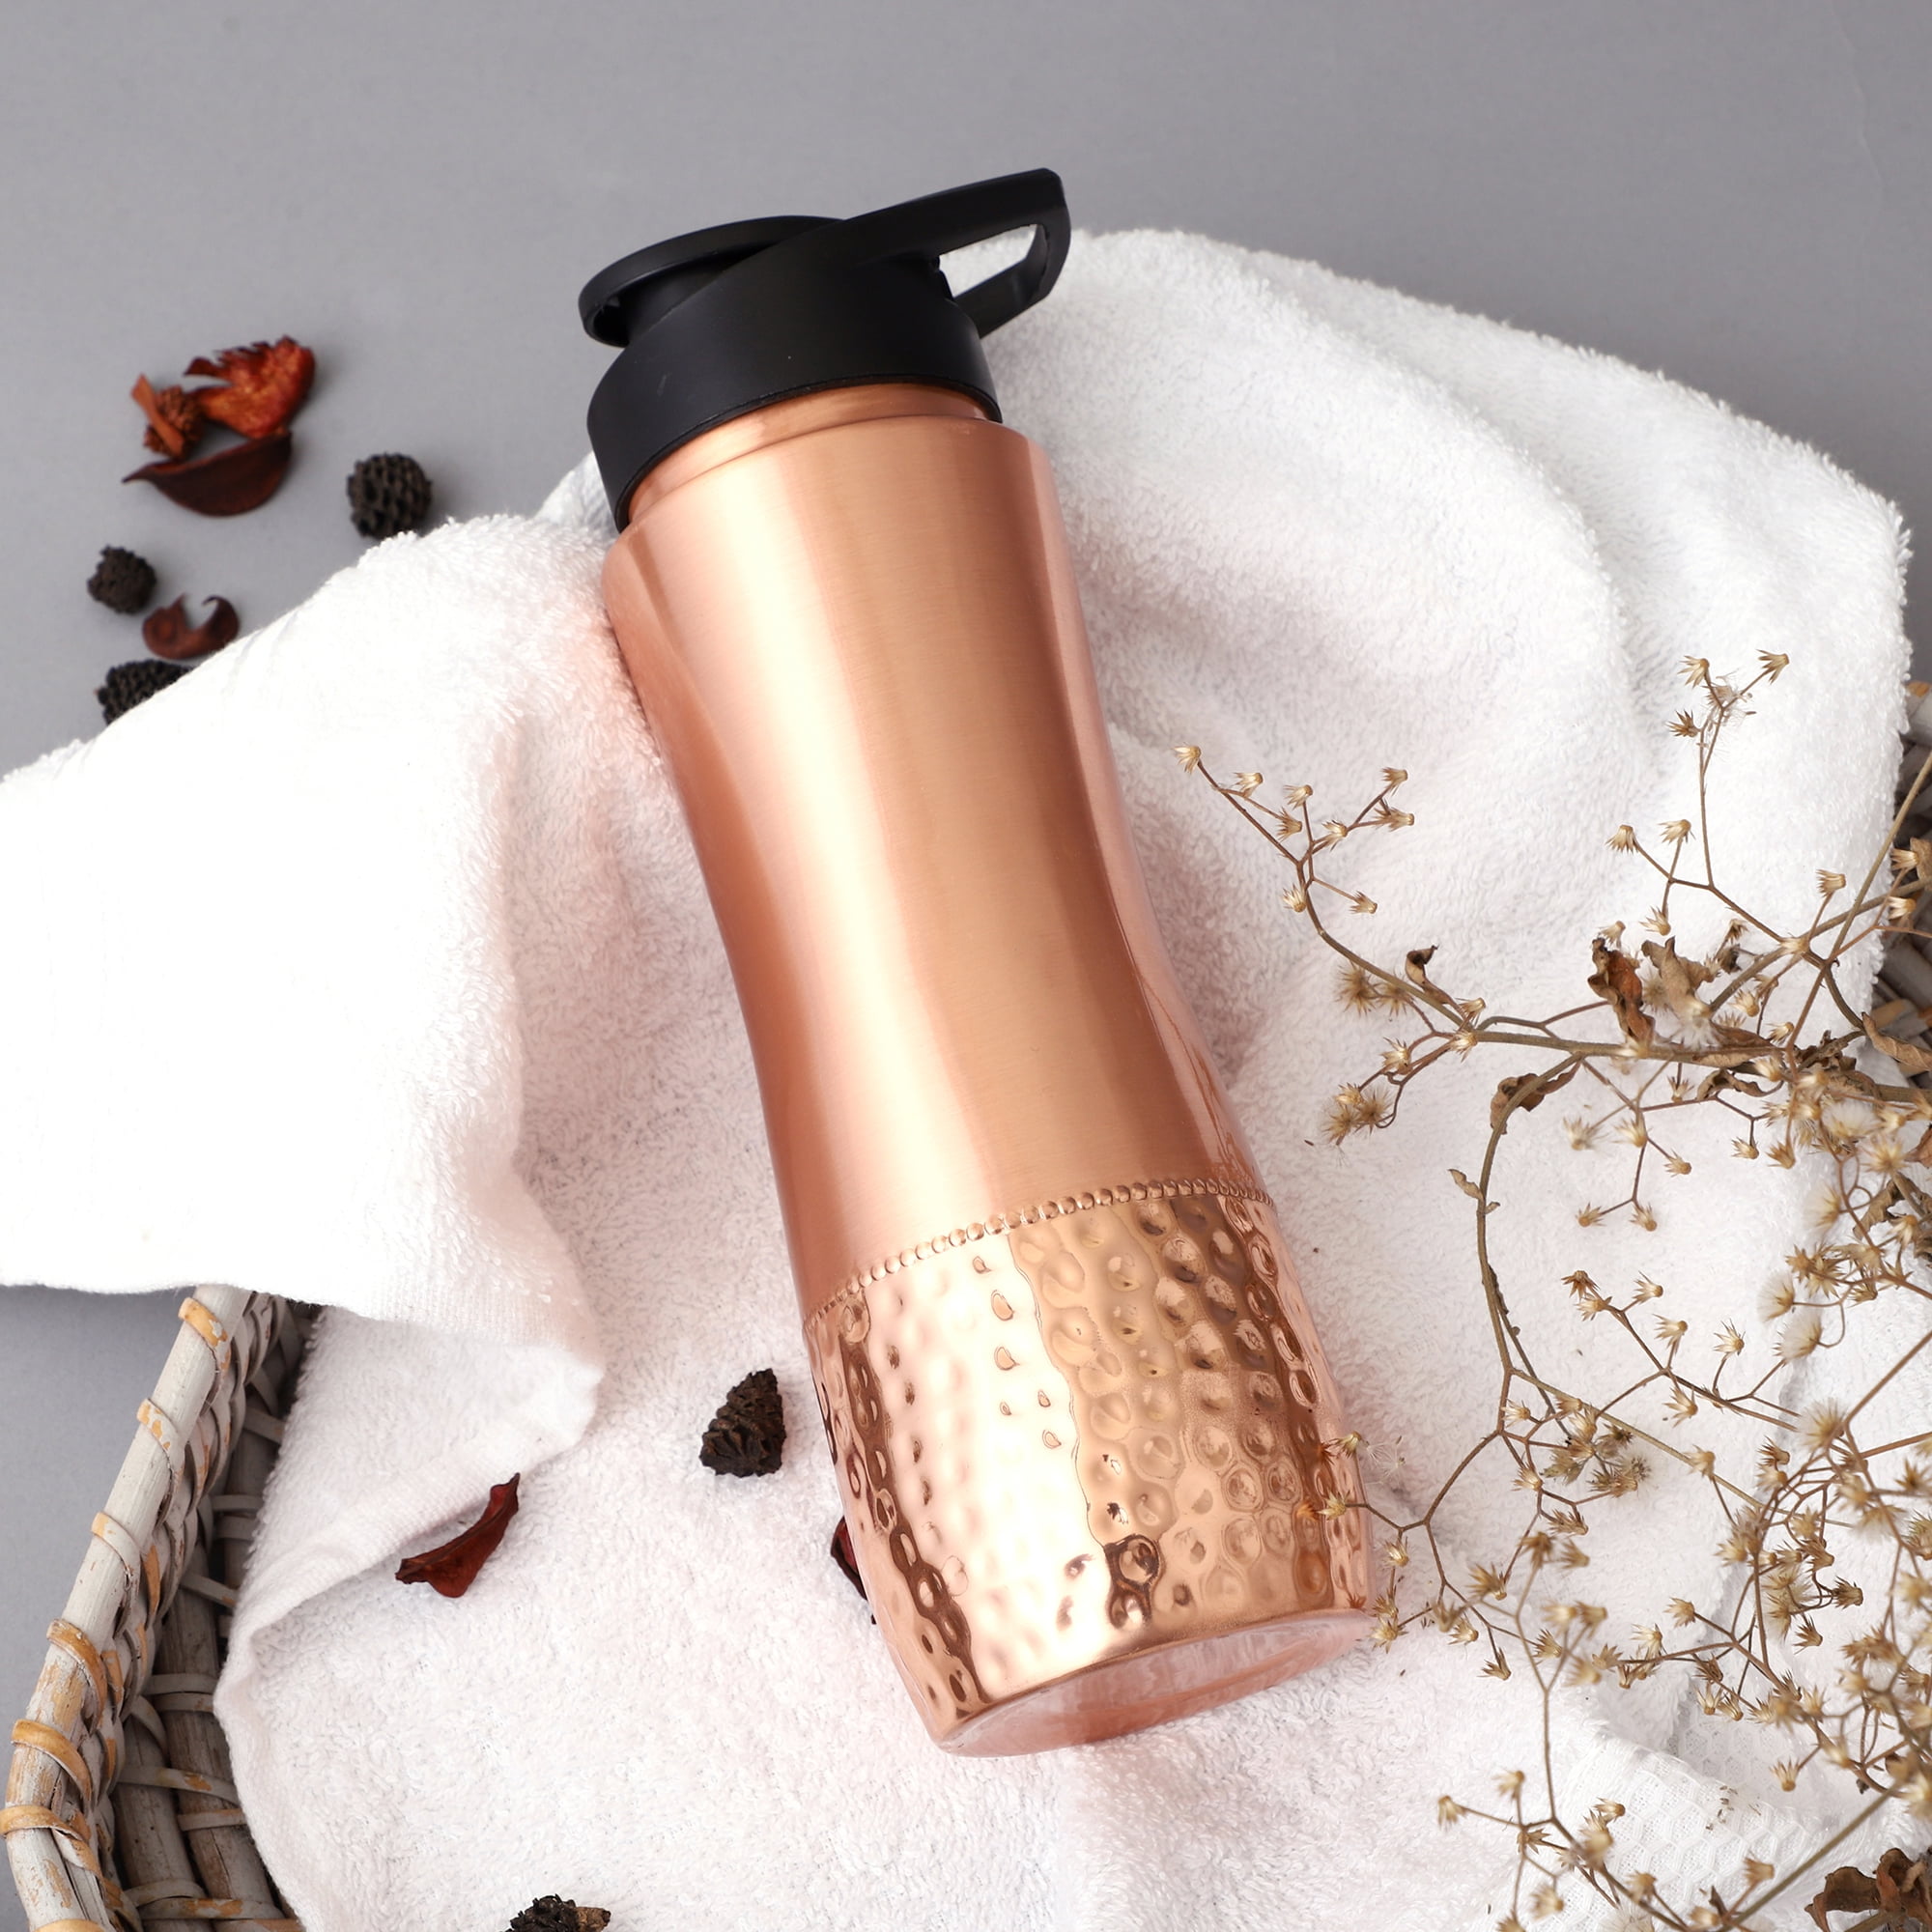 Zap impex Copper Water Bottle Sipper Pure Copper Bottle with